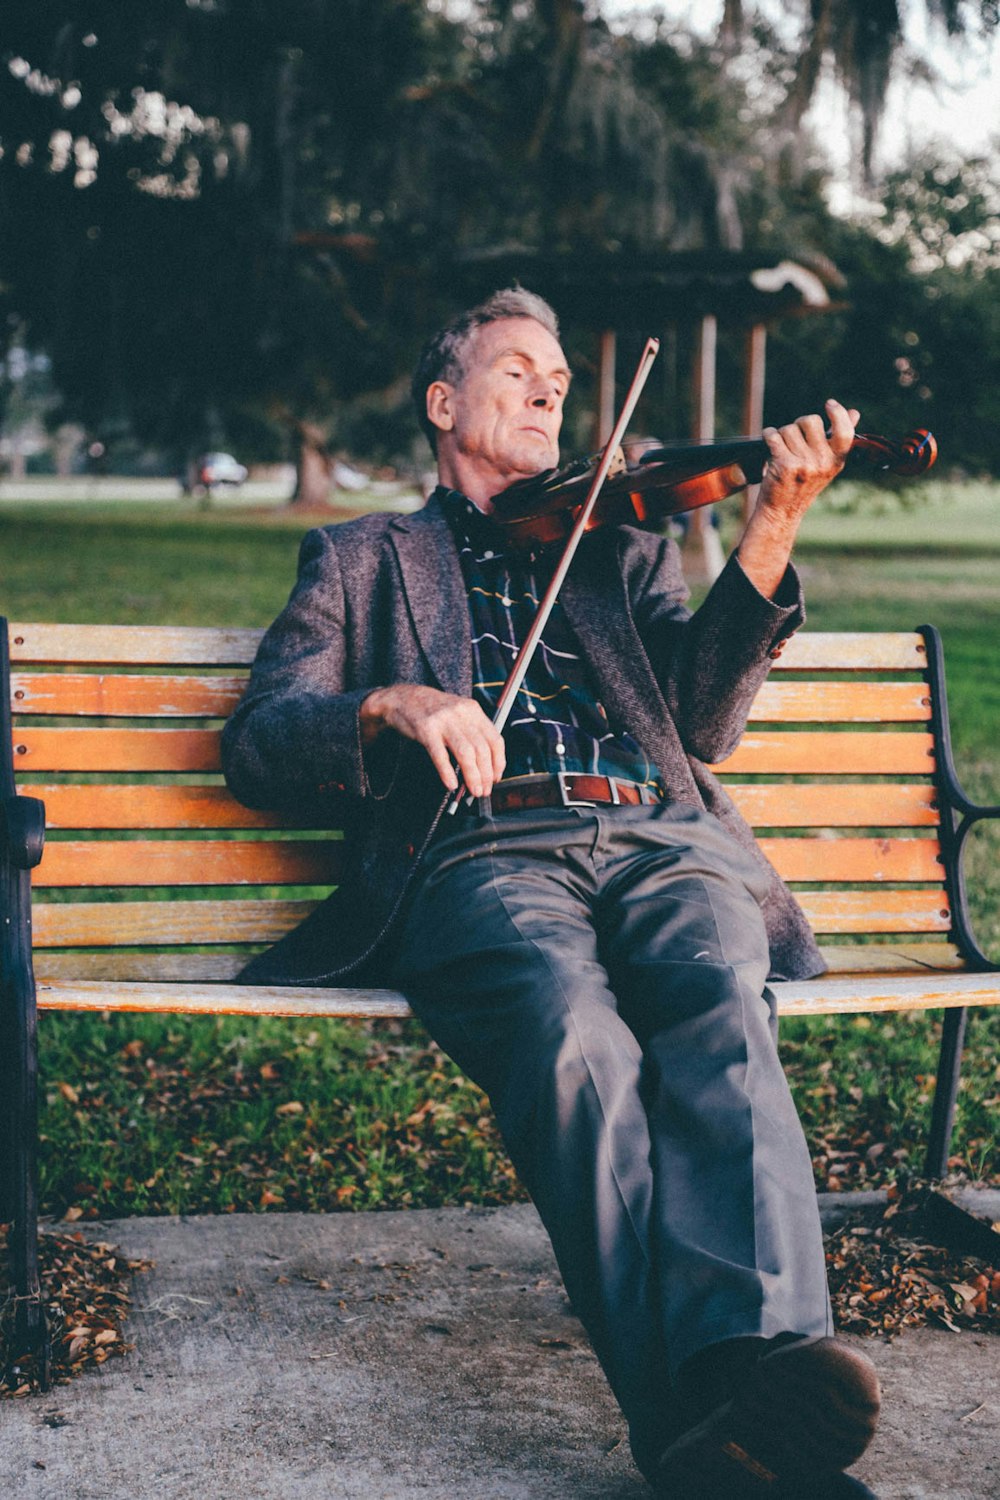 An older man playing a violin on a park bench.